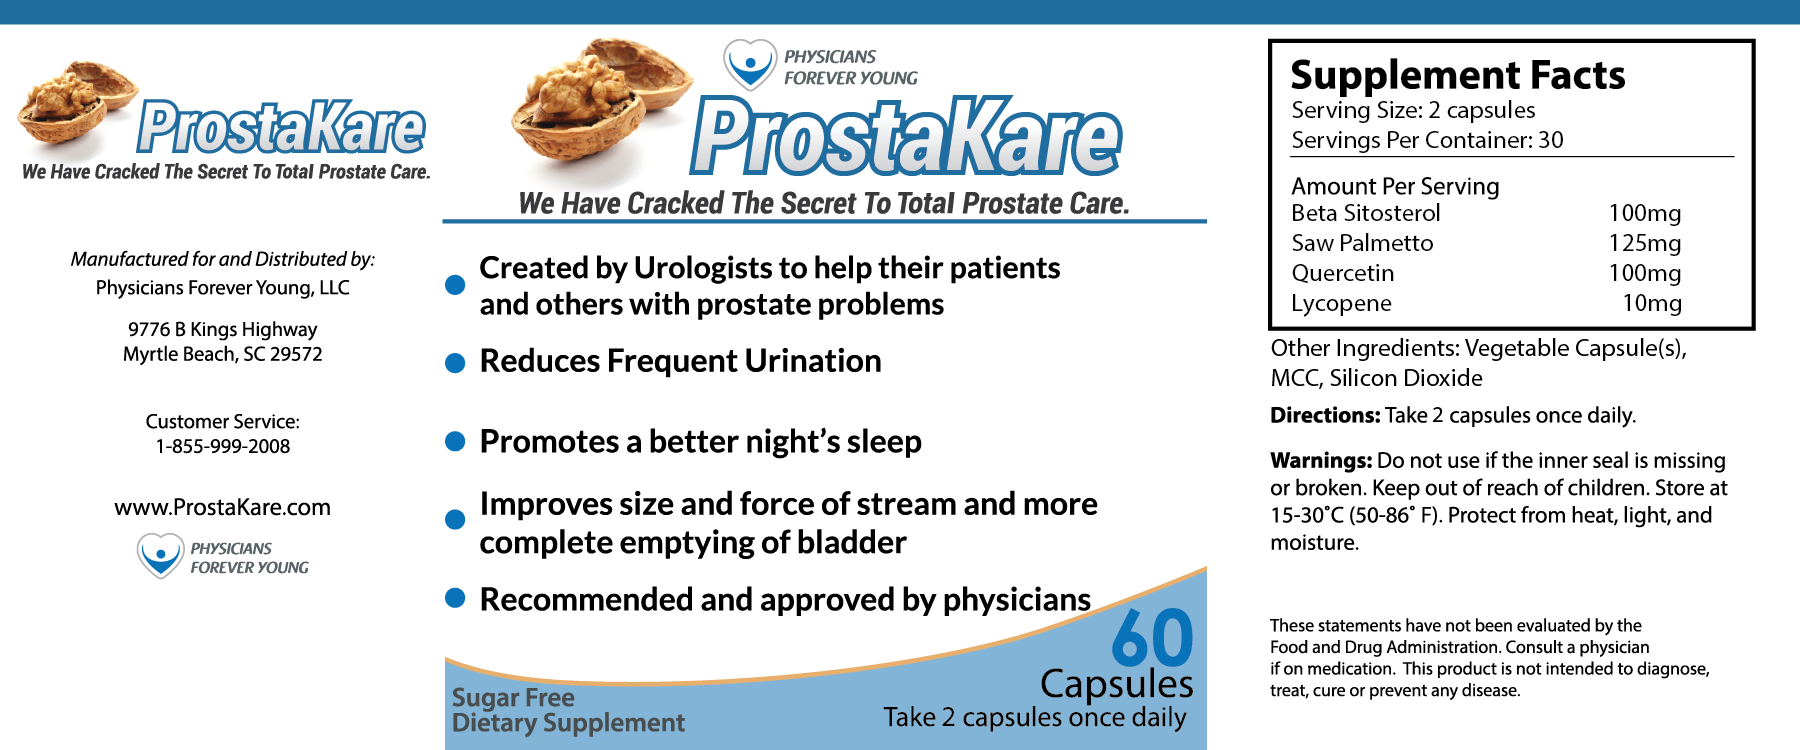 ProstaKare –Prostate Health Supplement Facts